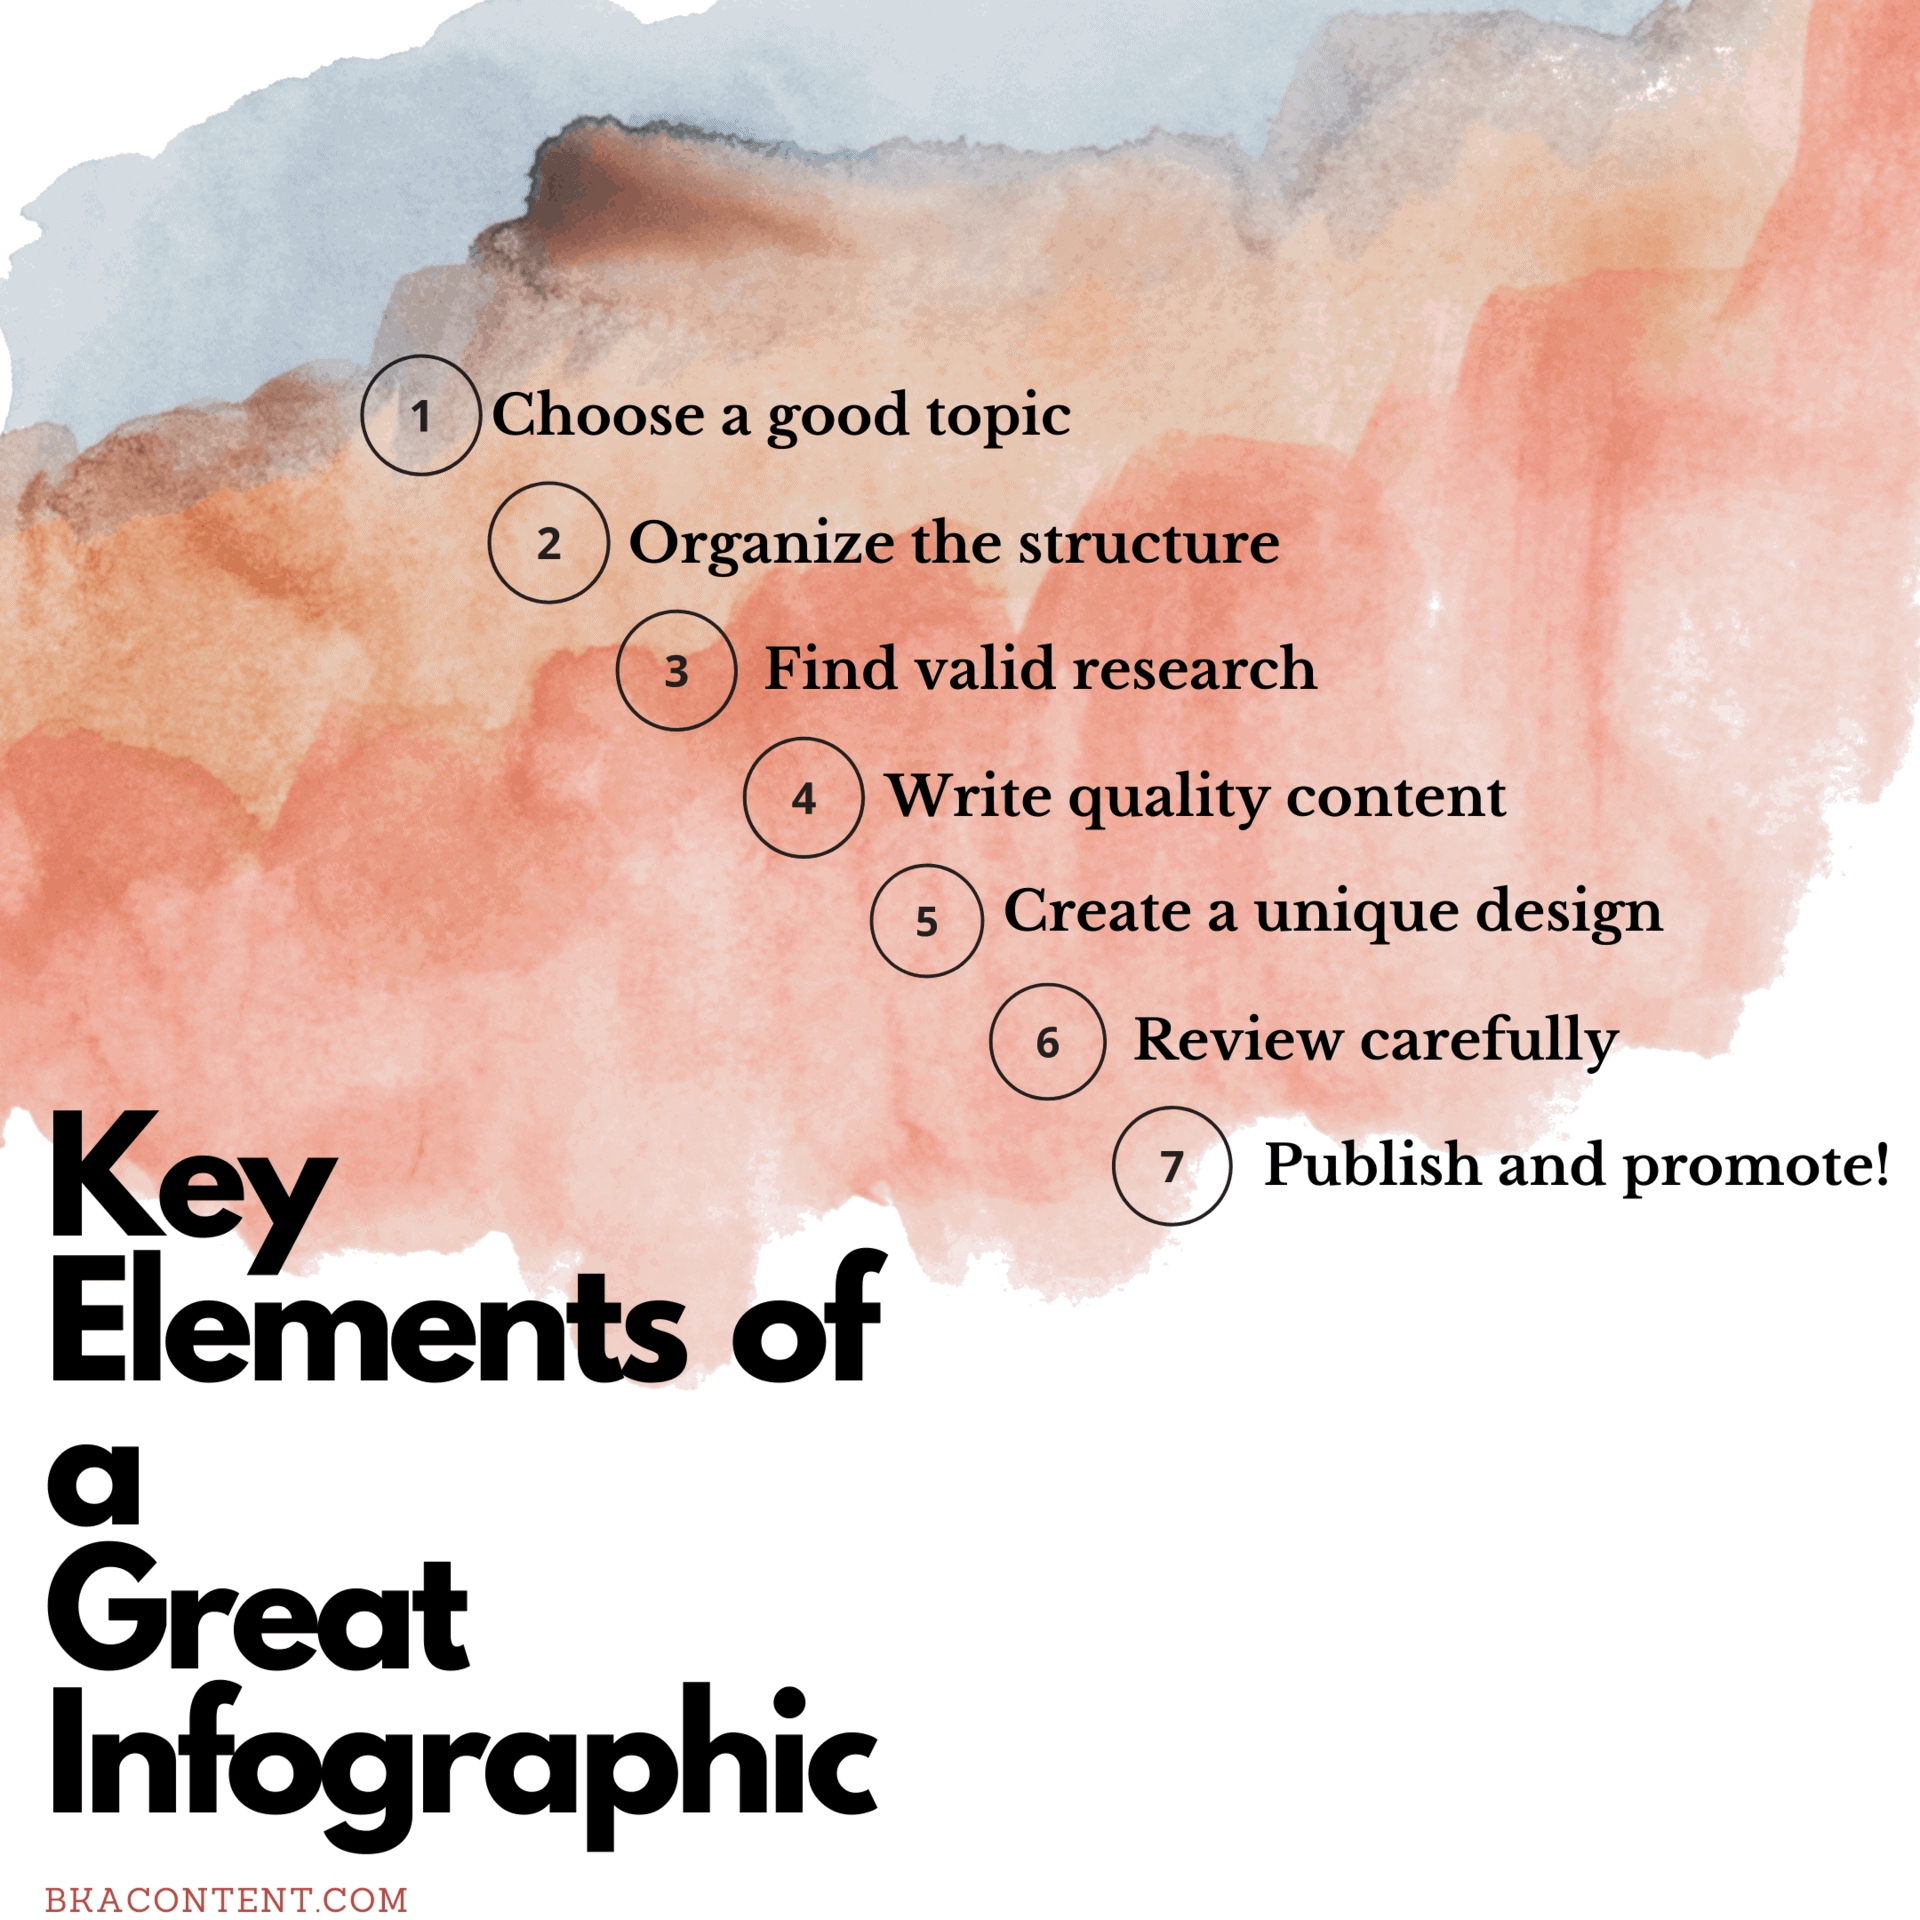 key elements of a great infographic